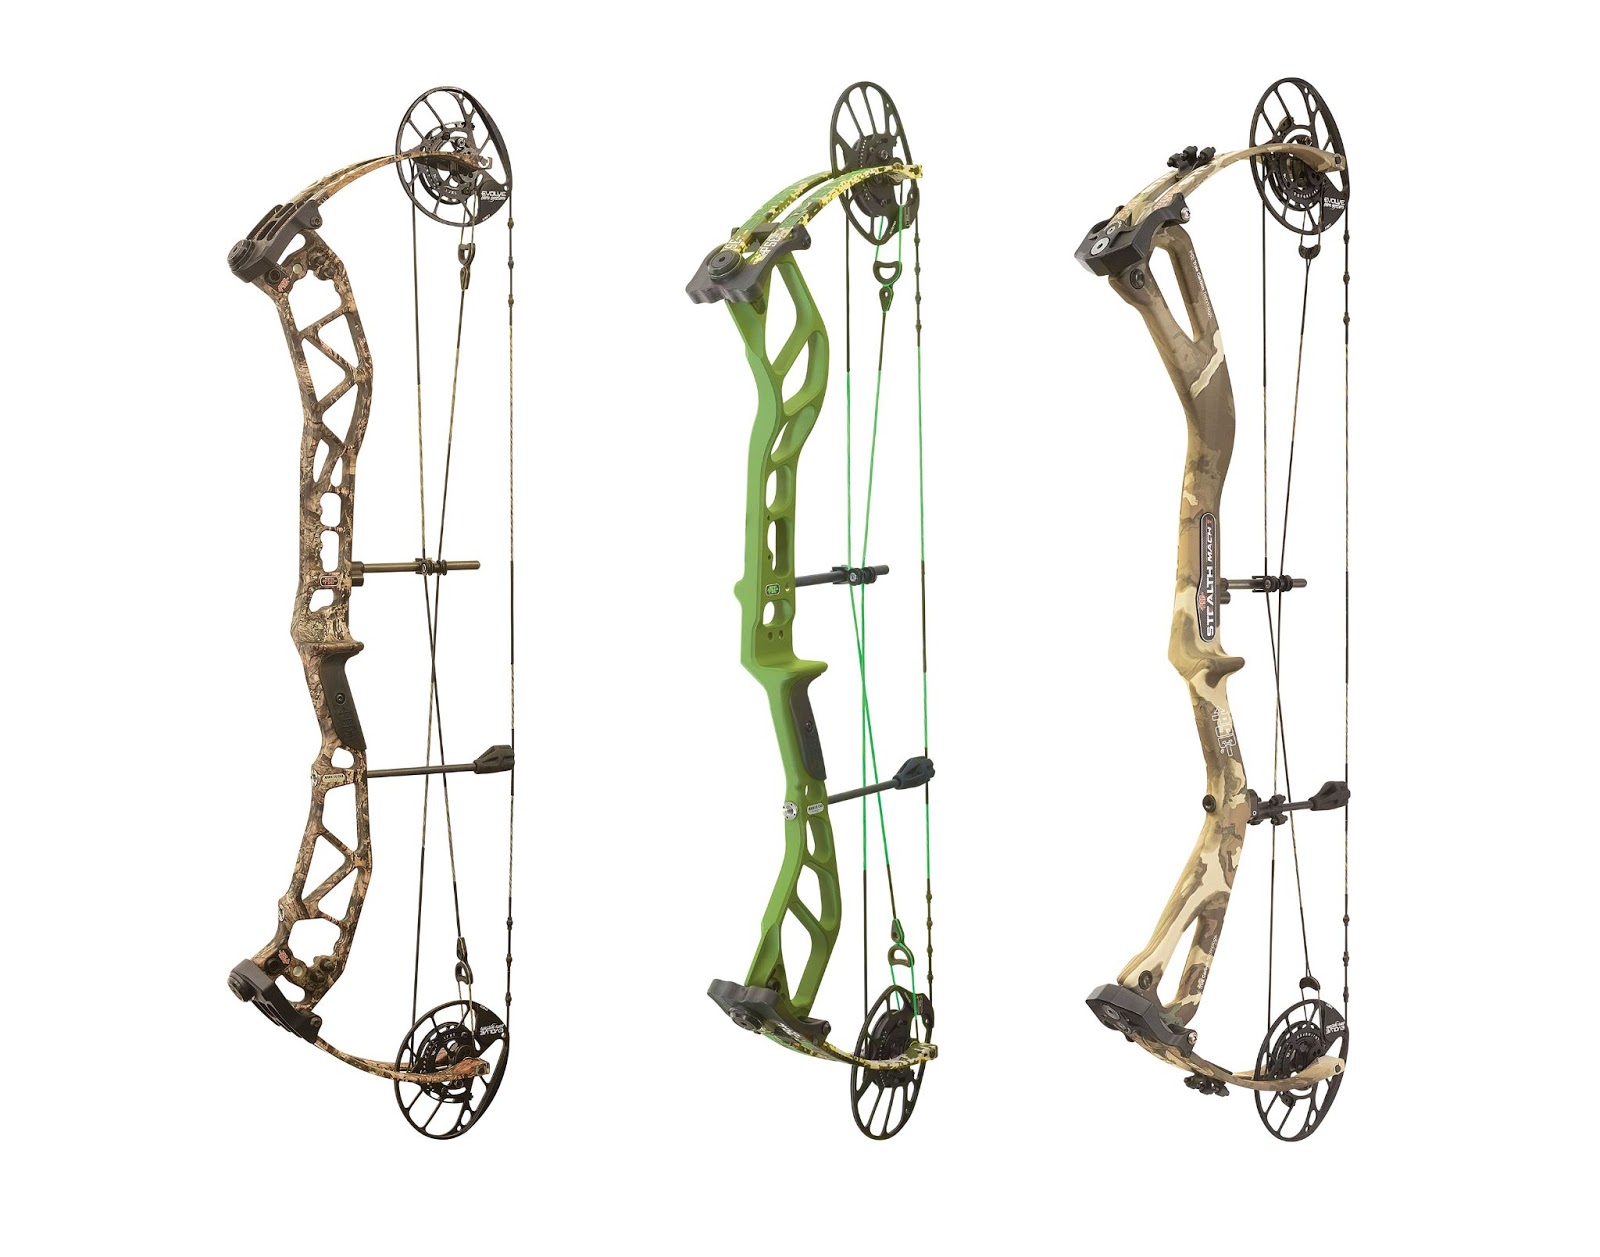 Three PSE compound bows side by side.